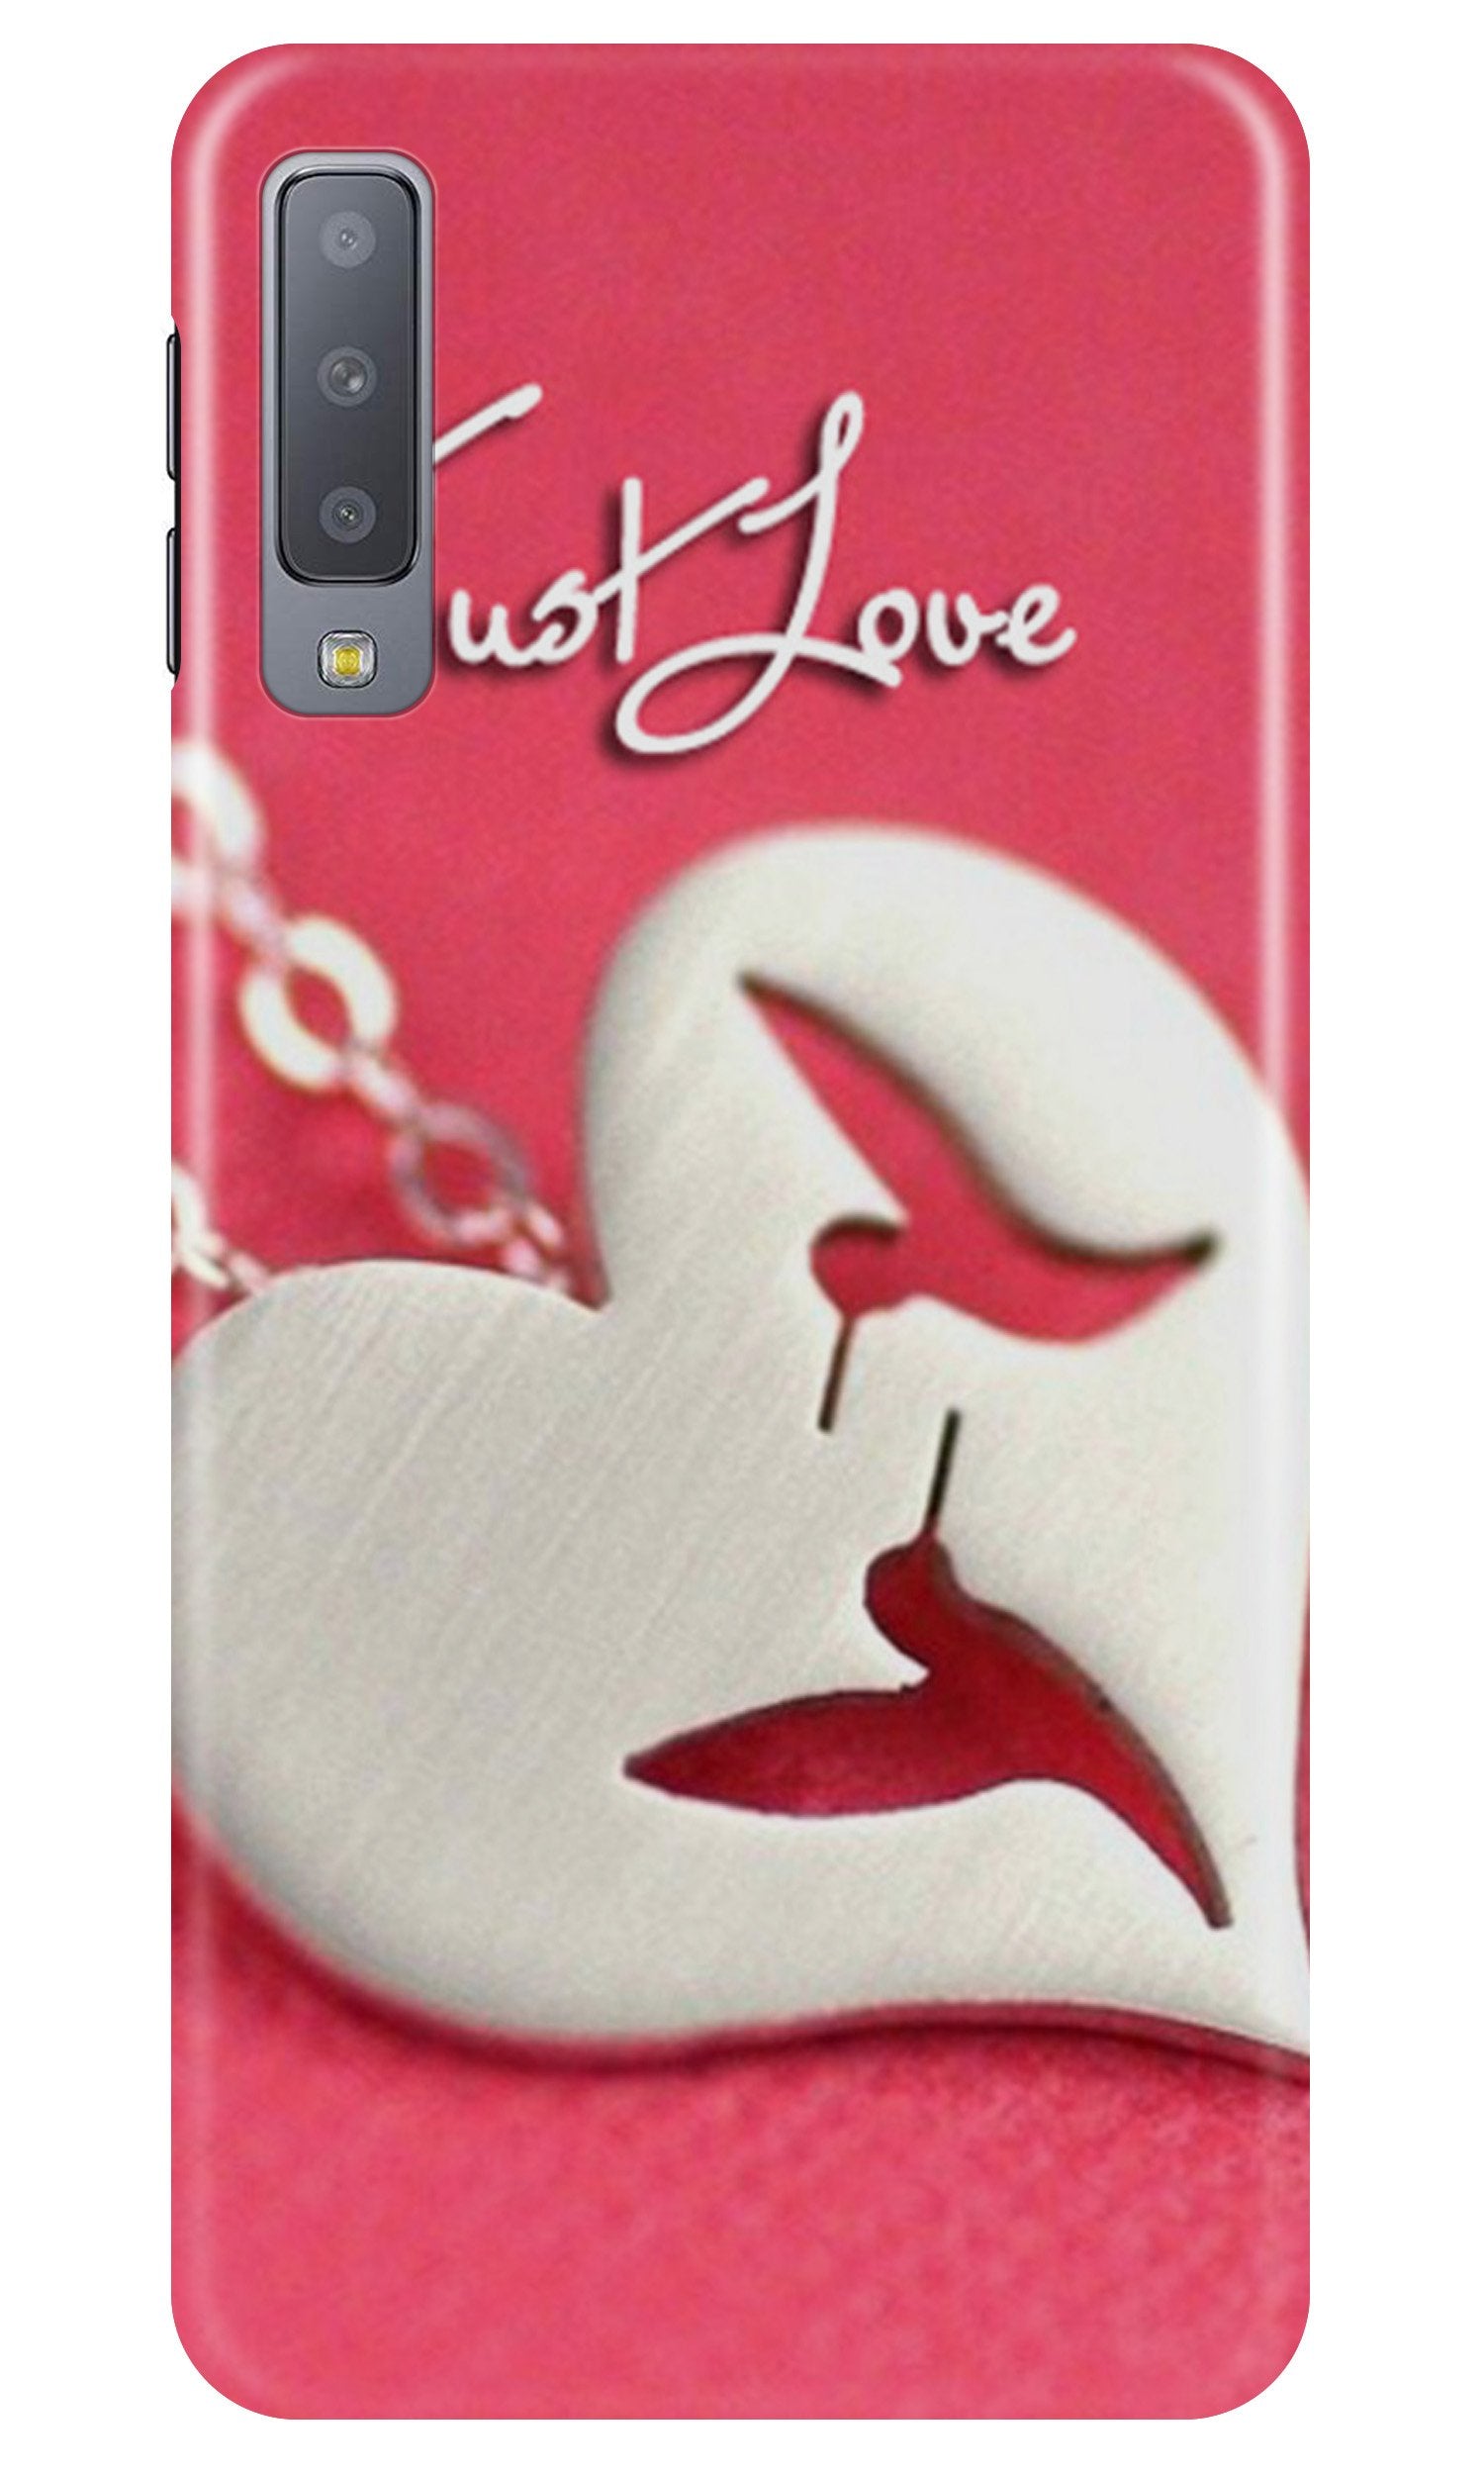 Just love Case for Samsung Galaxy A50s